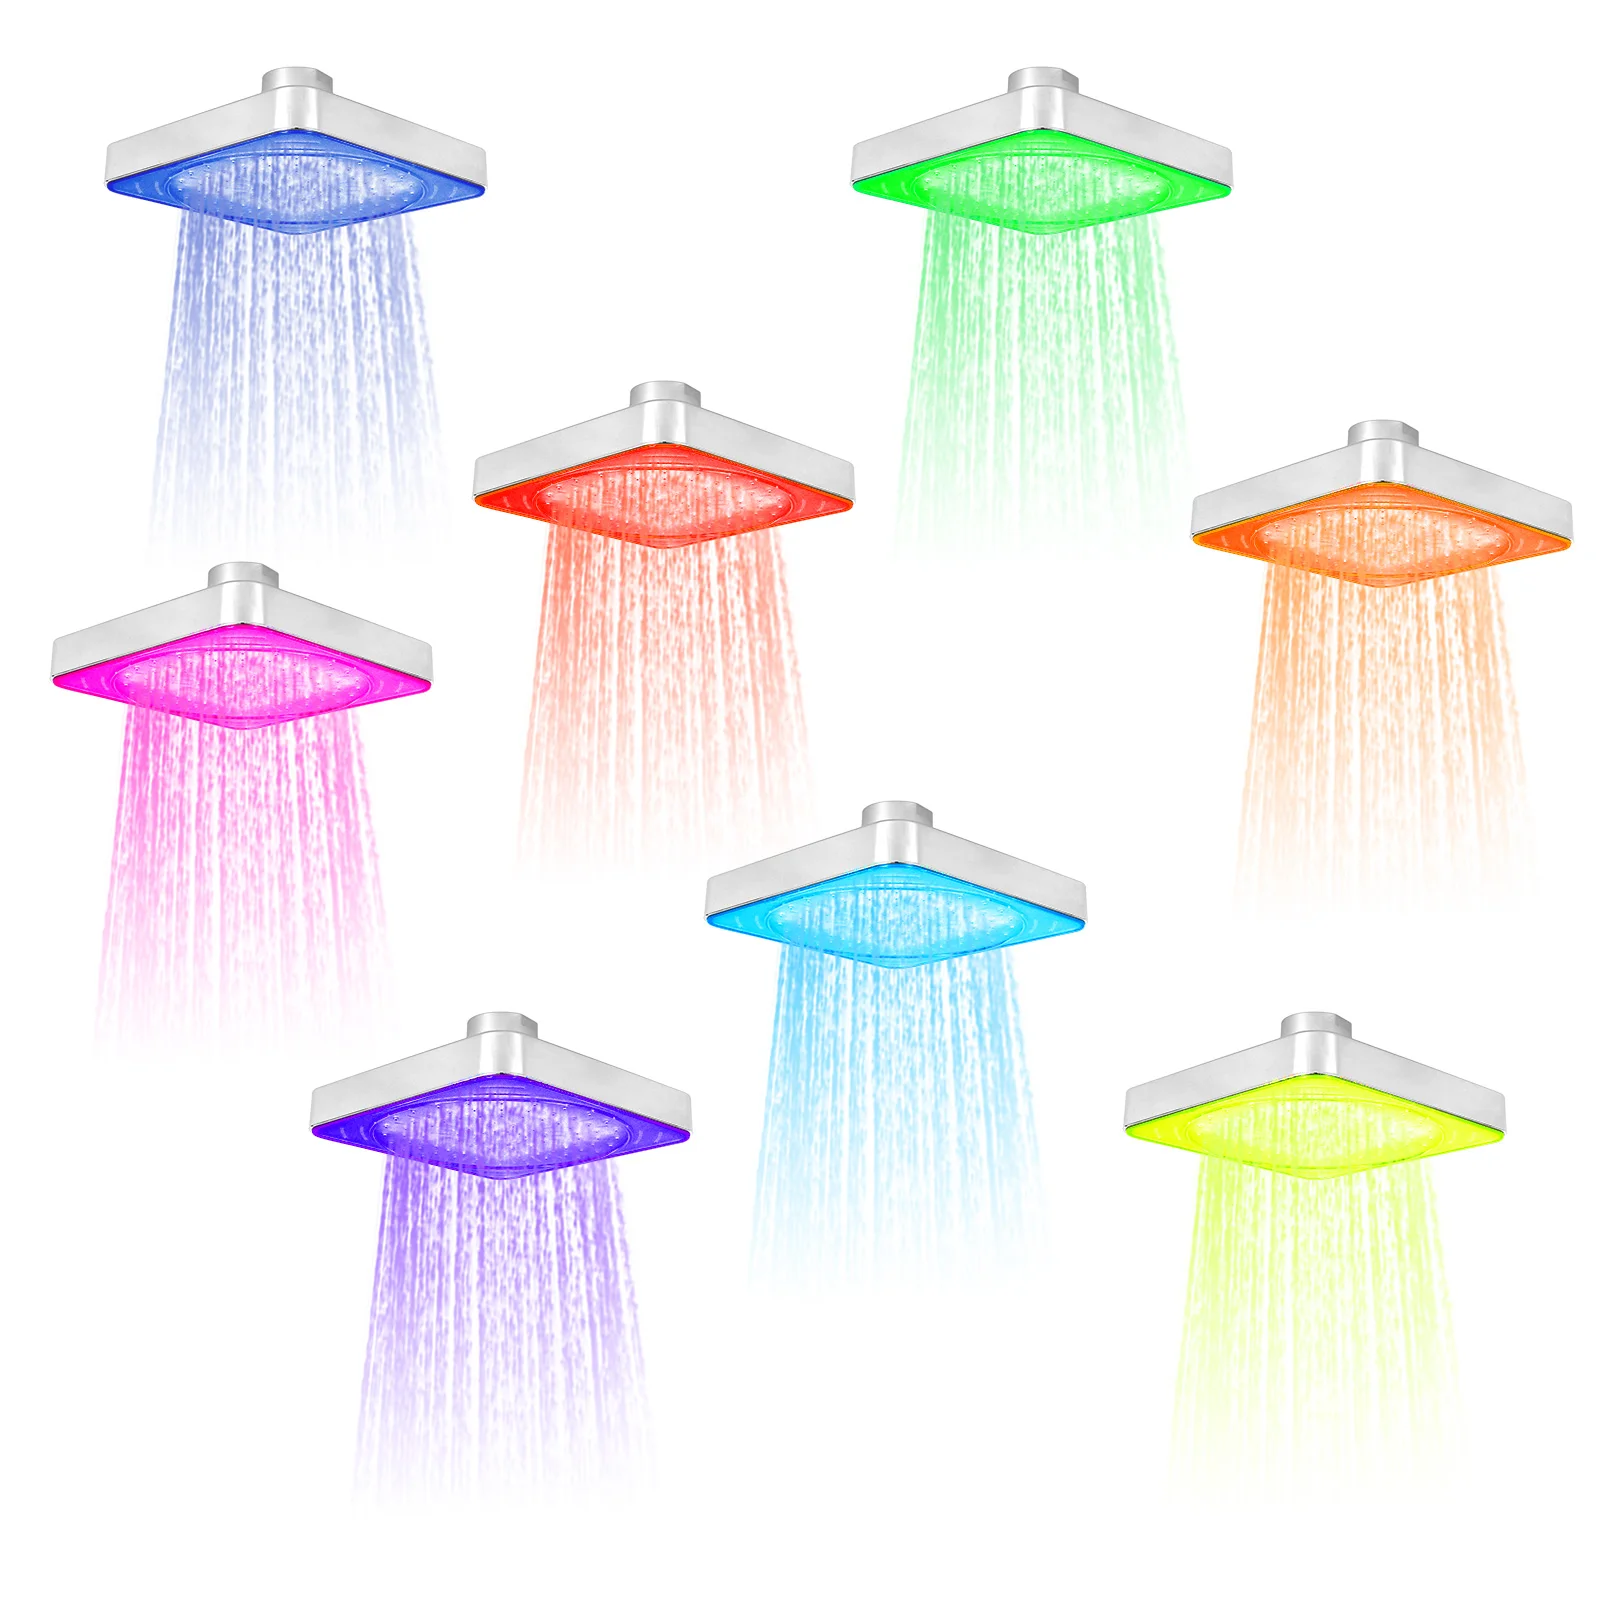 

NEW LED Shower Head 7 Color Light Automatically Changing LED Showerhead 6 inches LED Rainfall Shower Head Romantic LED Light